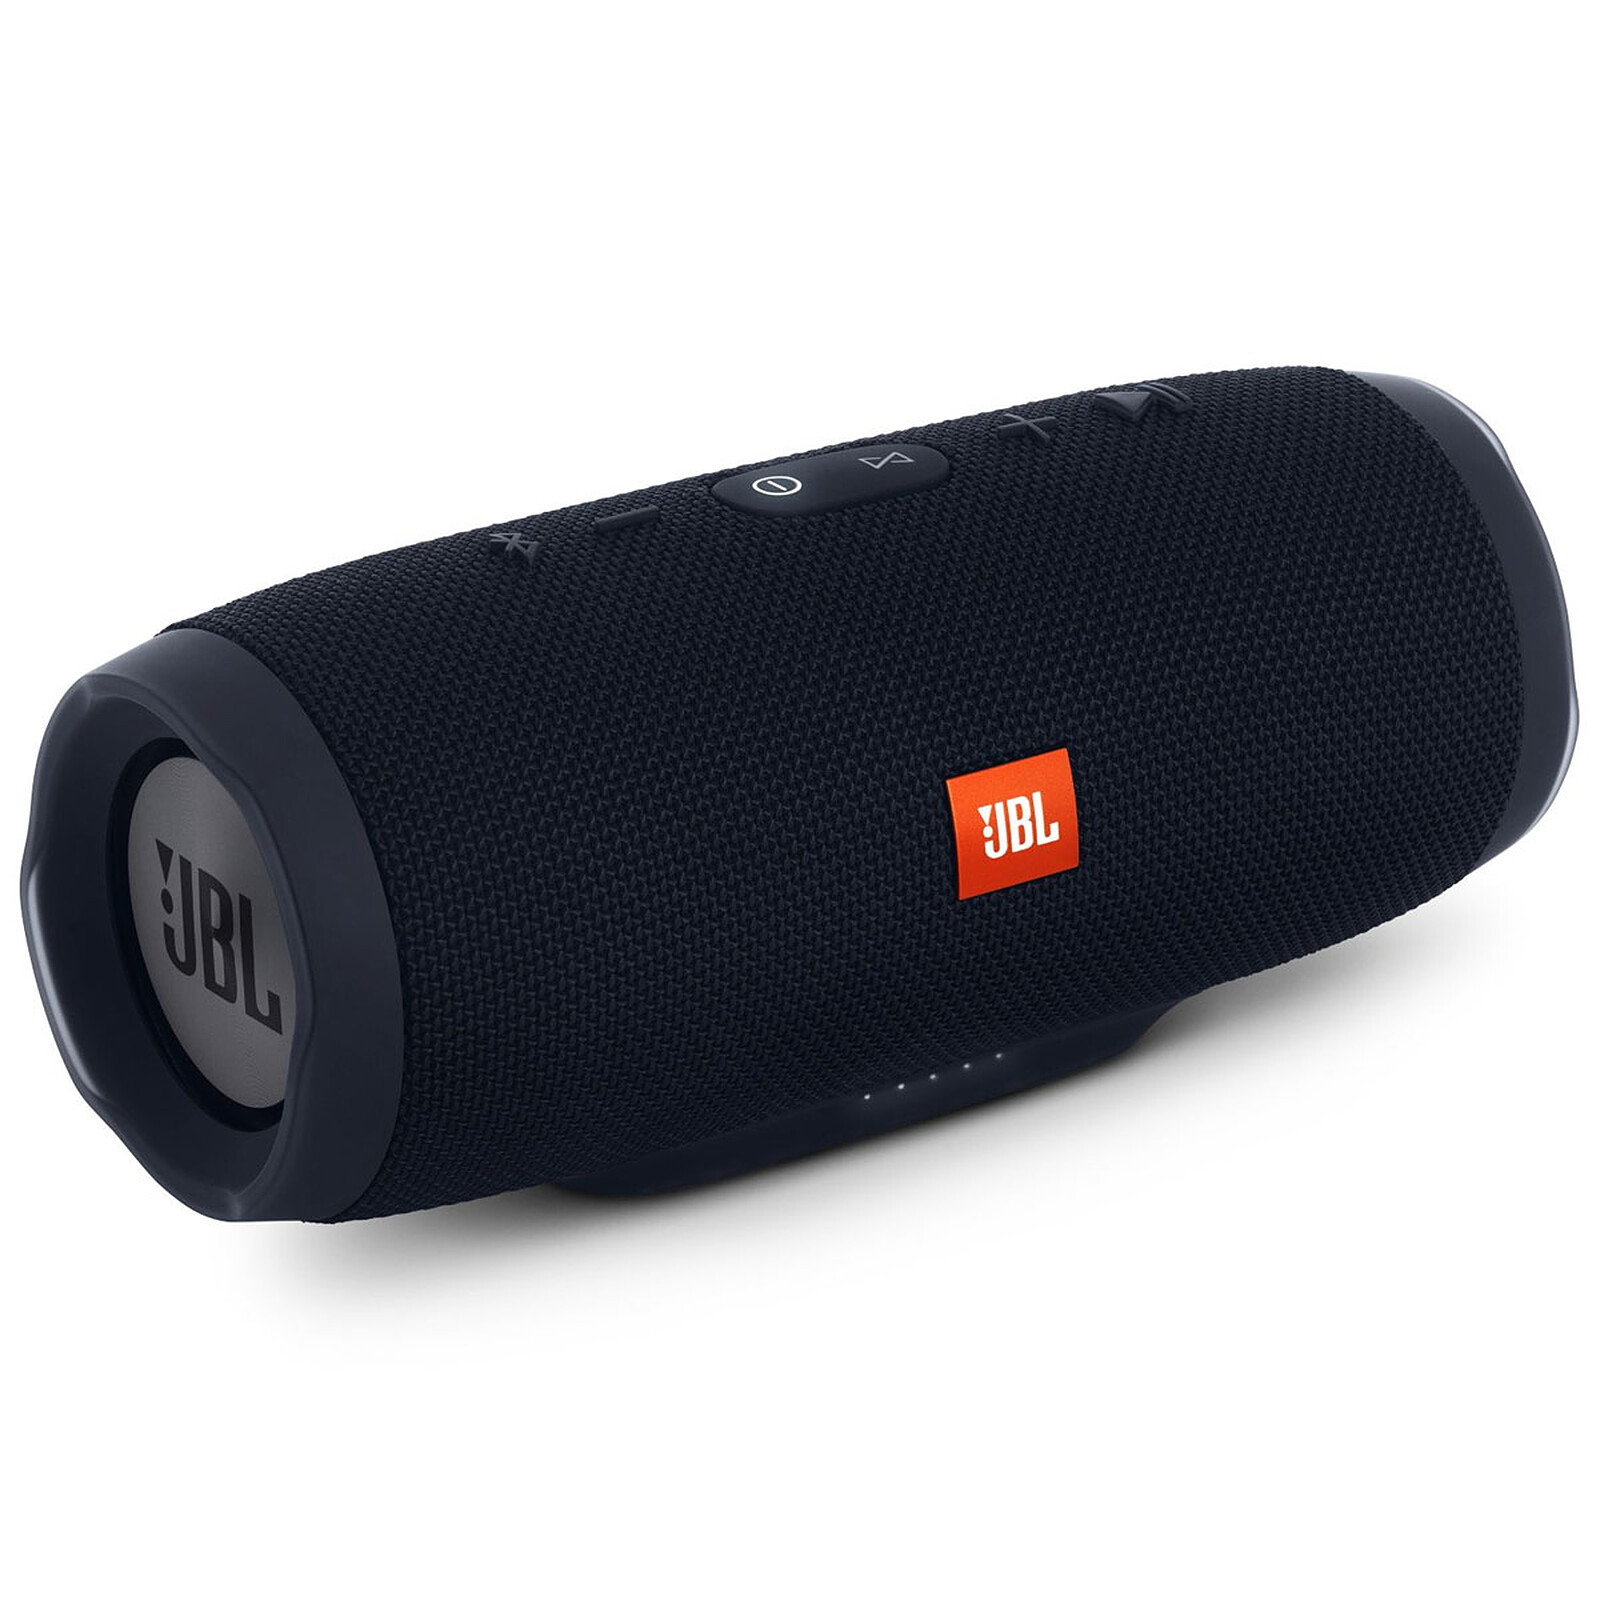 Disponible oscuro Stratford on Avon JBL Charge 3 Stealth Edition - Altavoz Bluetooth JBL en LDLC |  ¡Musericordia!